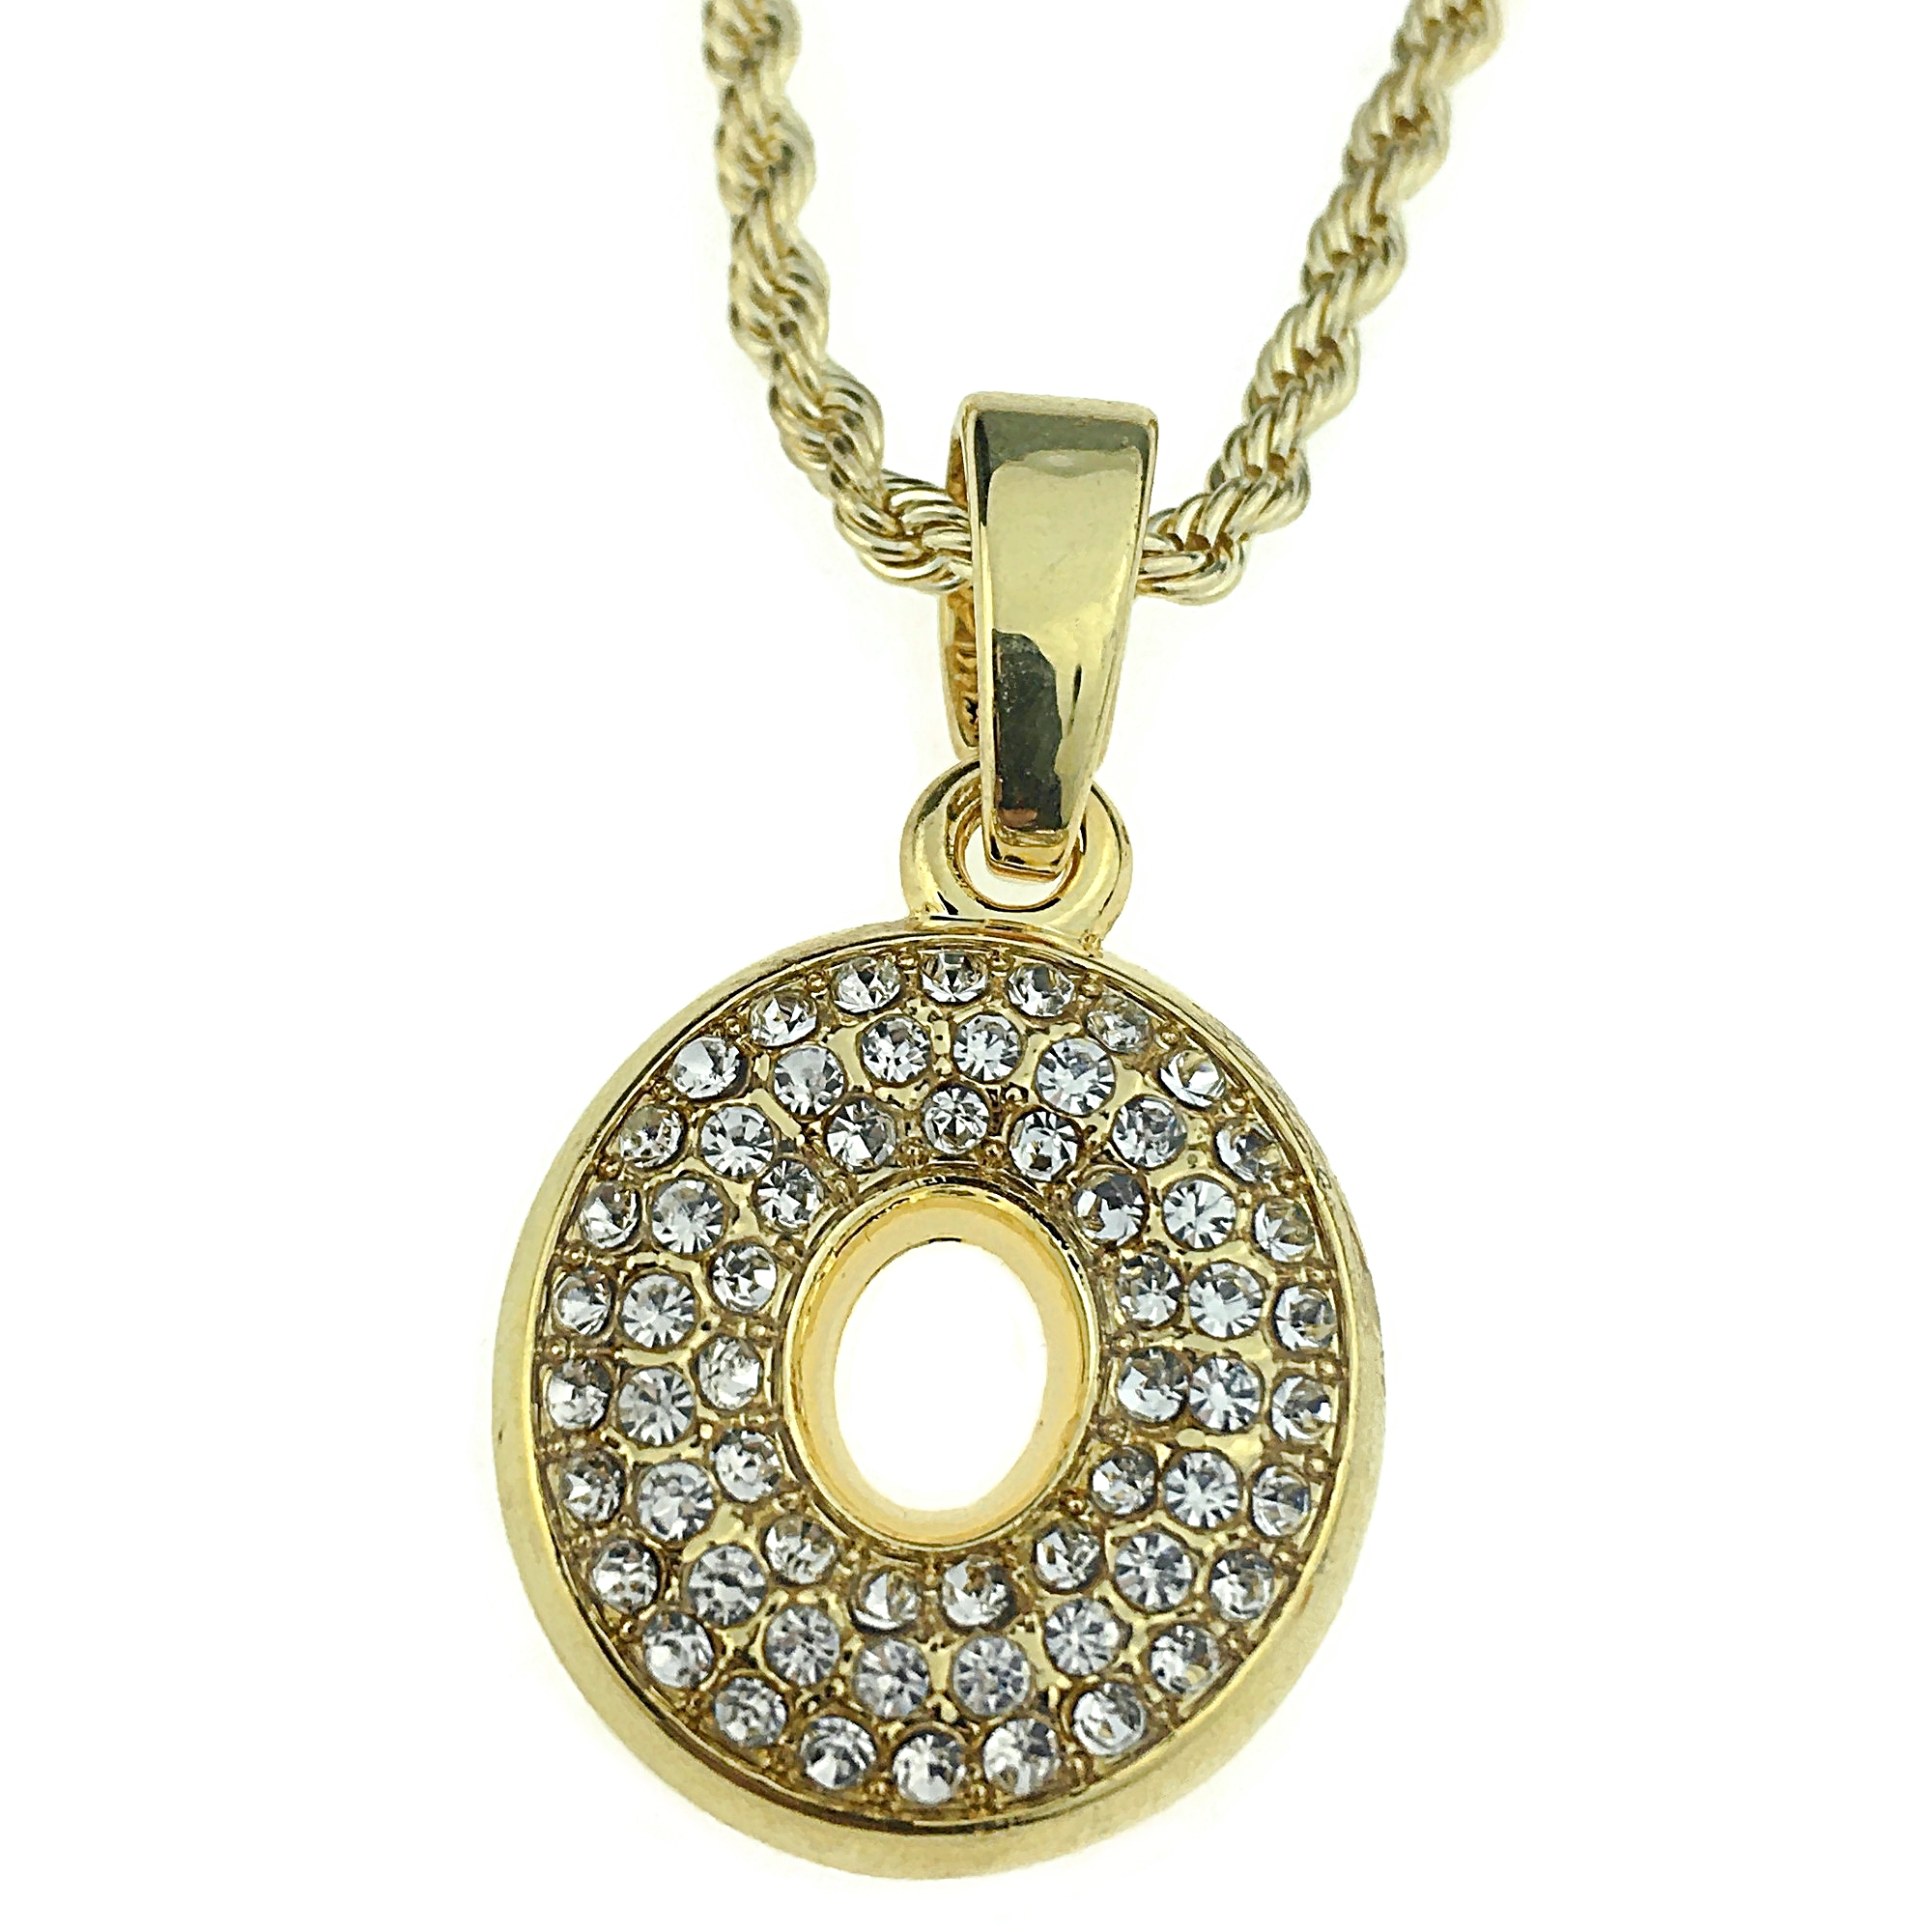 Gold Plated Rope Chain - Iced Out Sublimation Pendant White Gold by Pearde Design